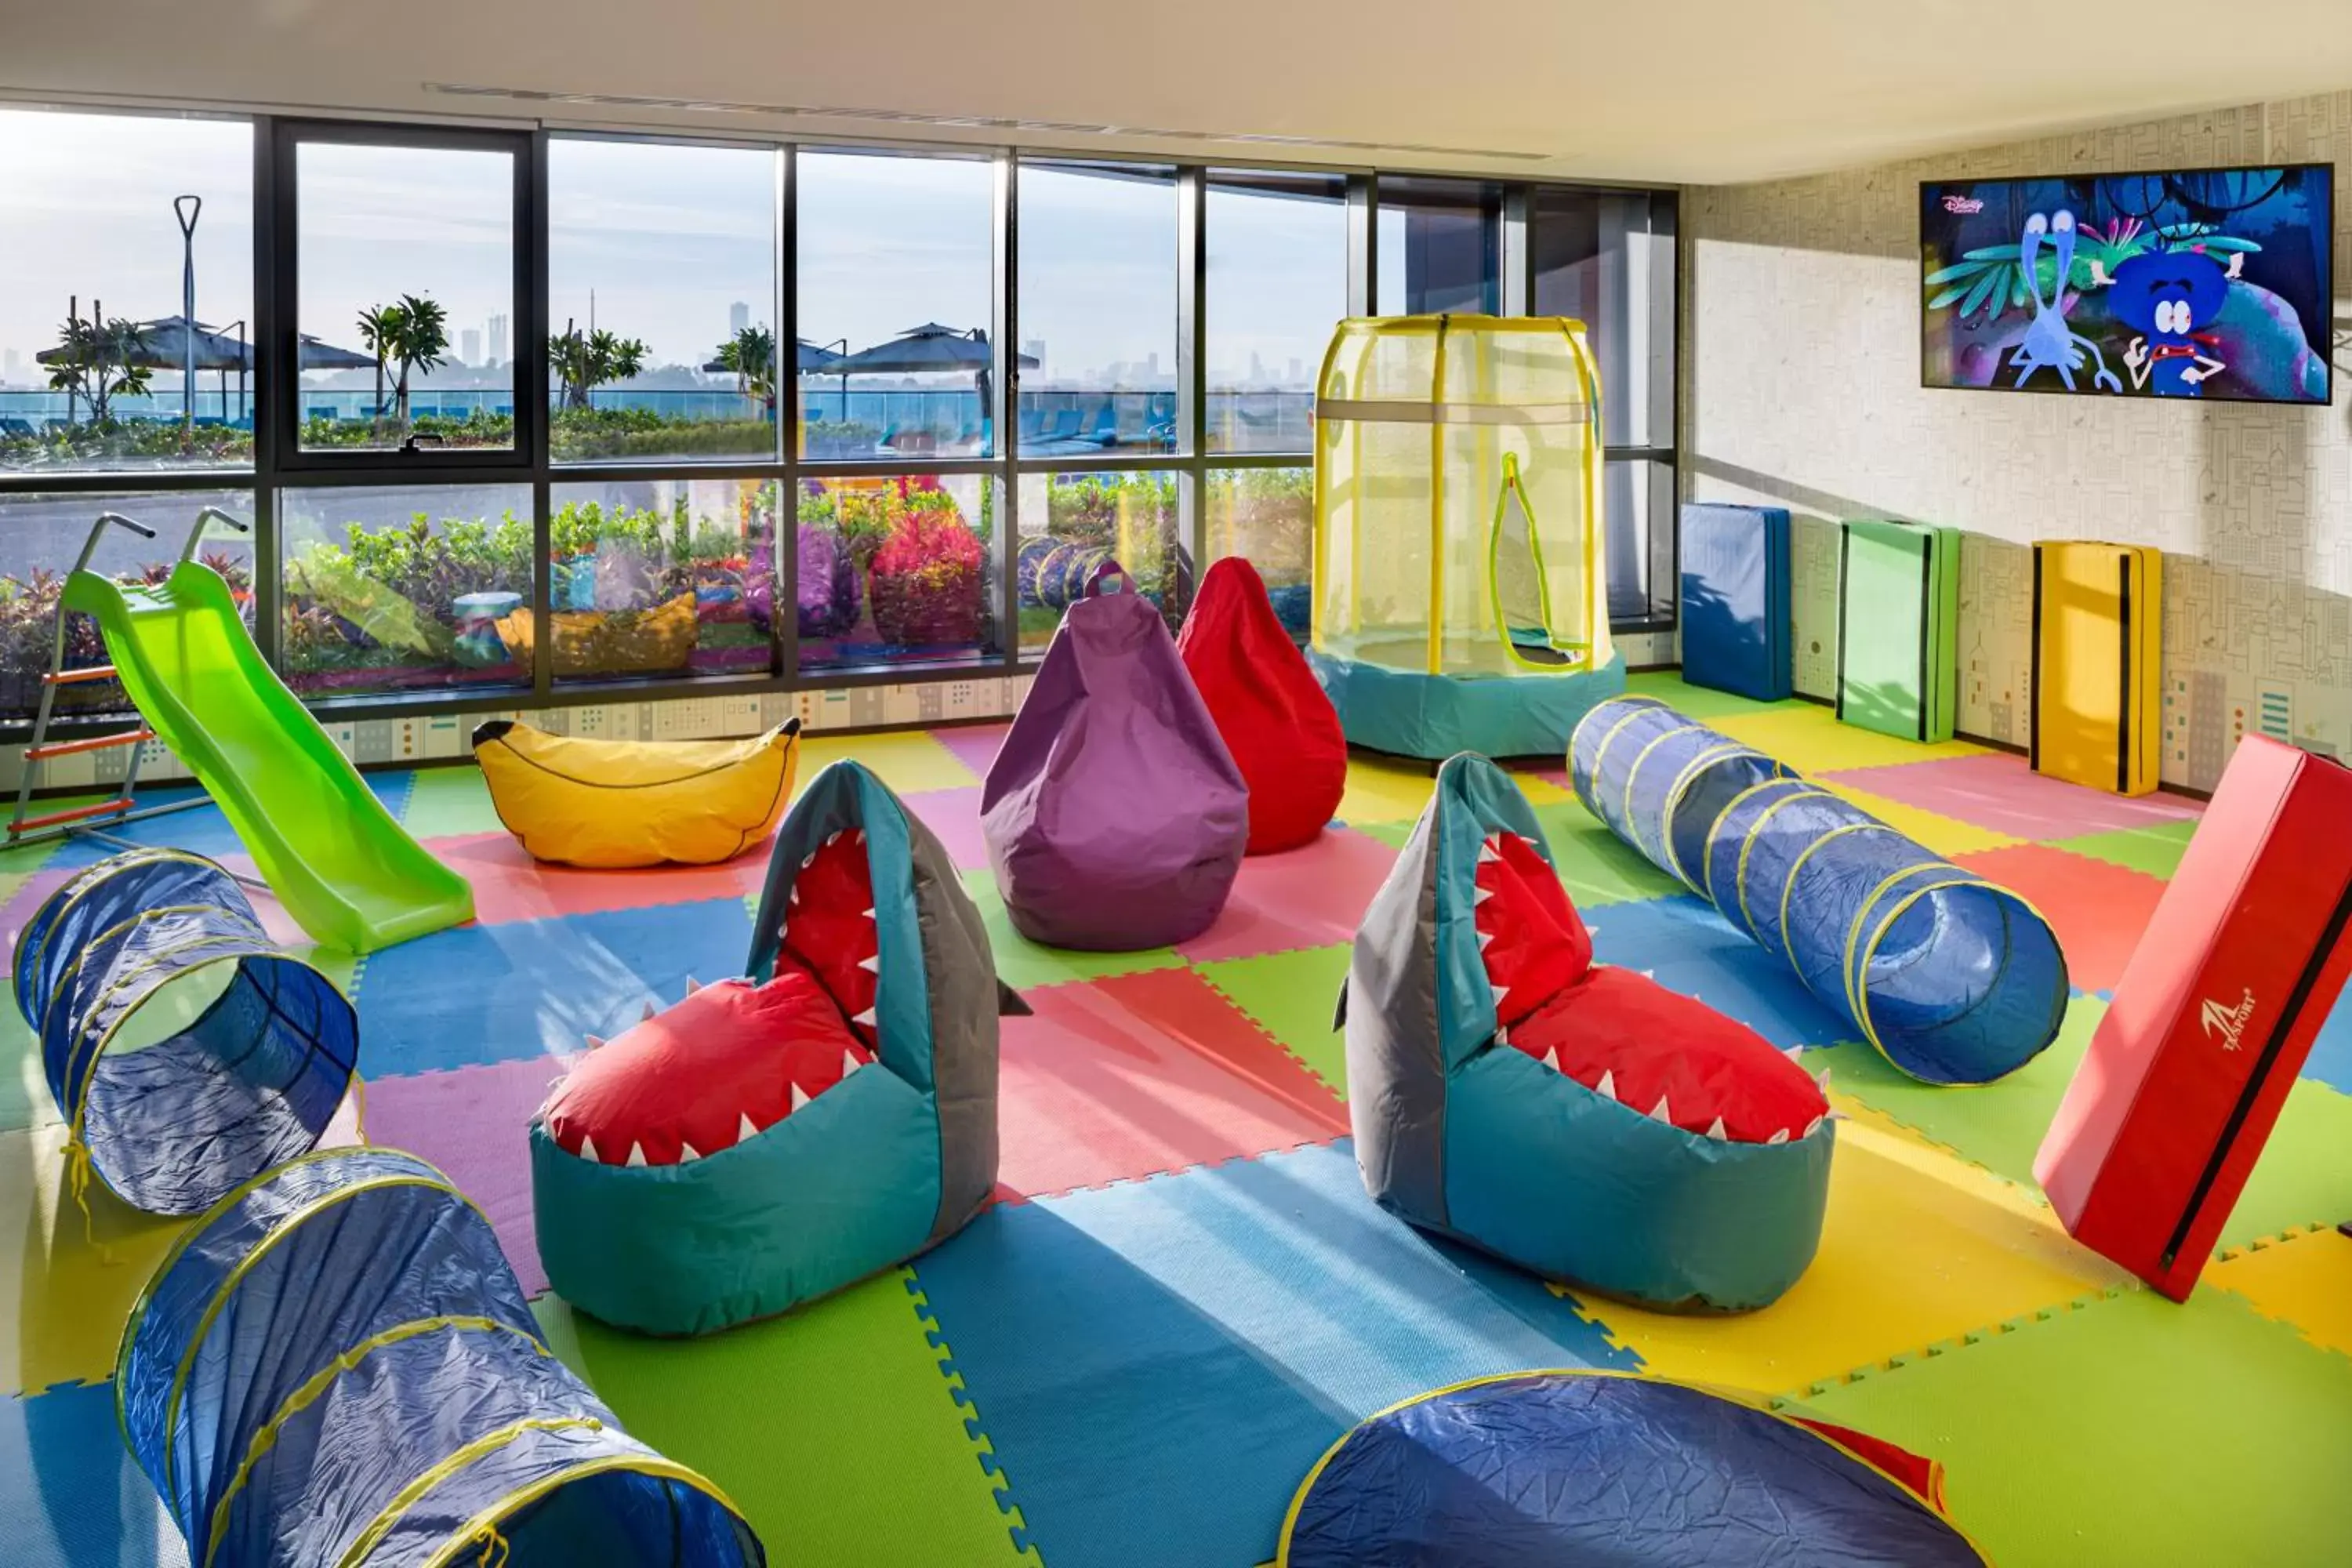 Kids's club in Millennium Place Barsha Heights Hotel